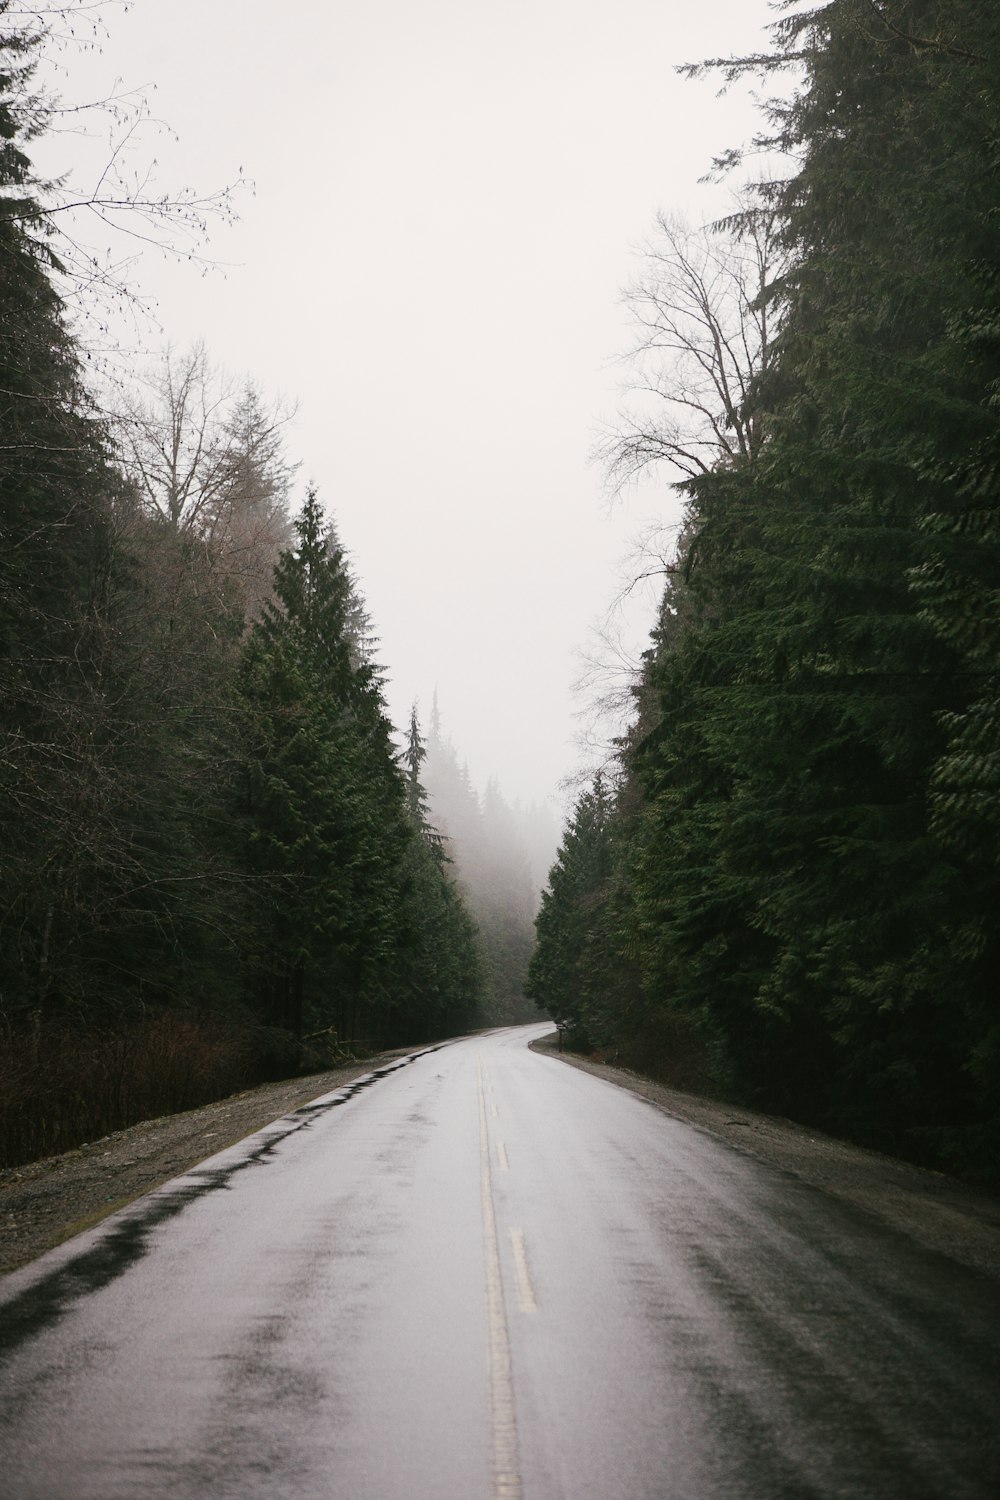 A wet tree-lined road on a foggy day